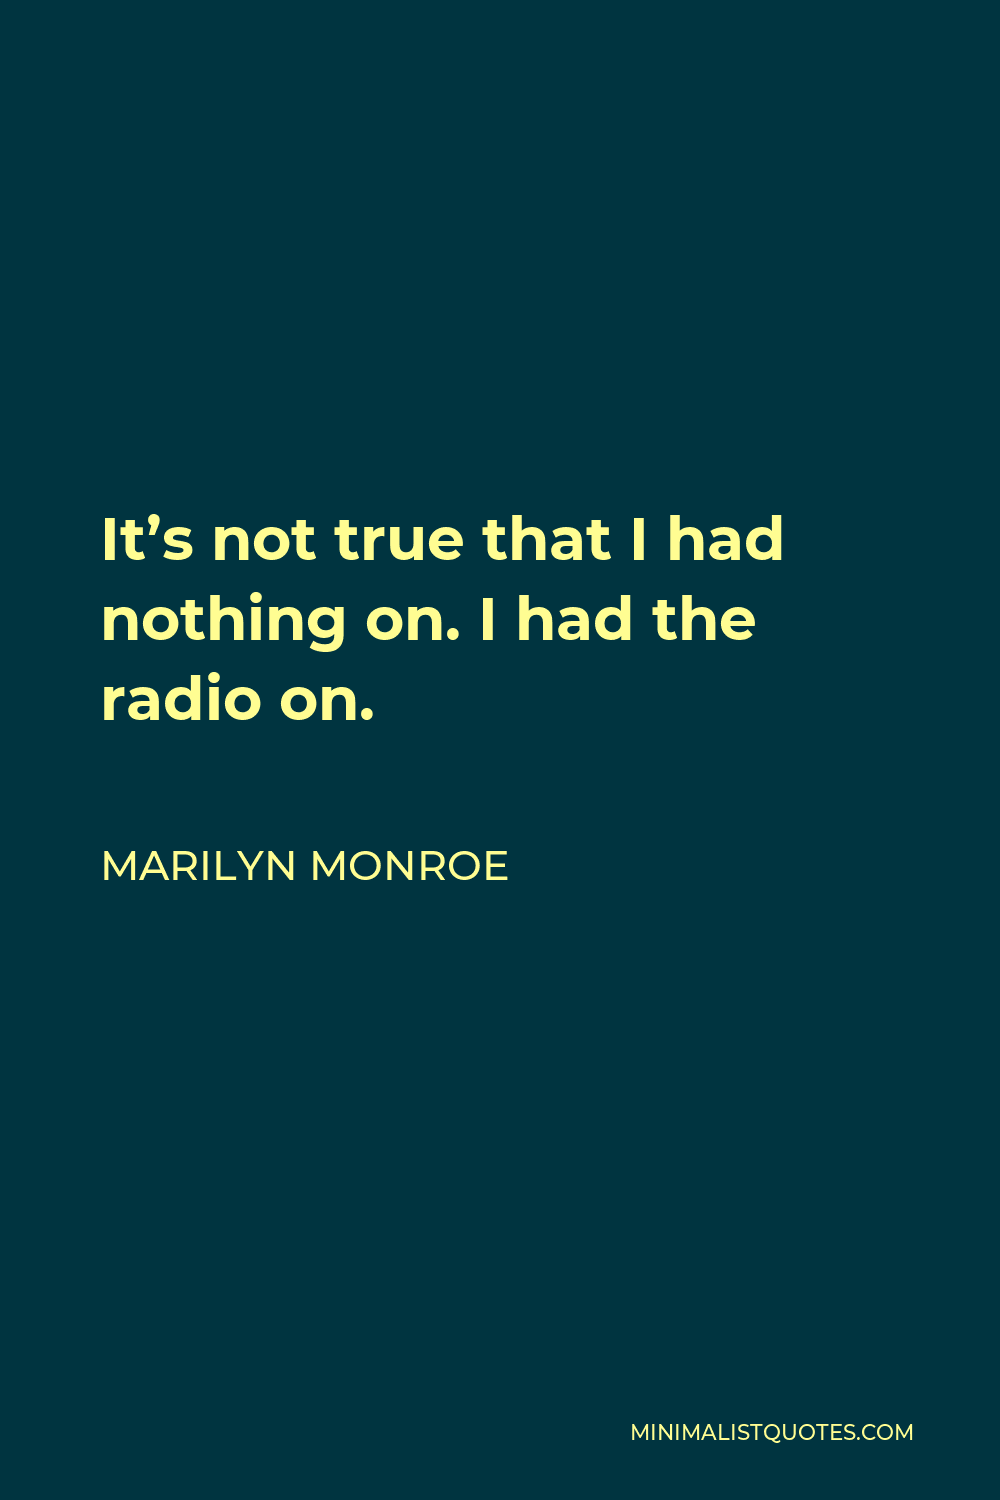 Marilyn Monroe Quote - It’s not true that I had nothing on. I had the radio on.